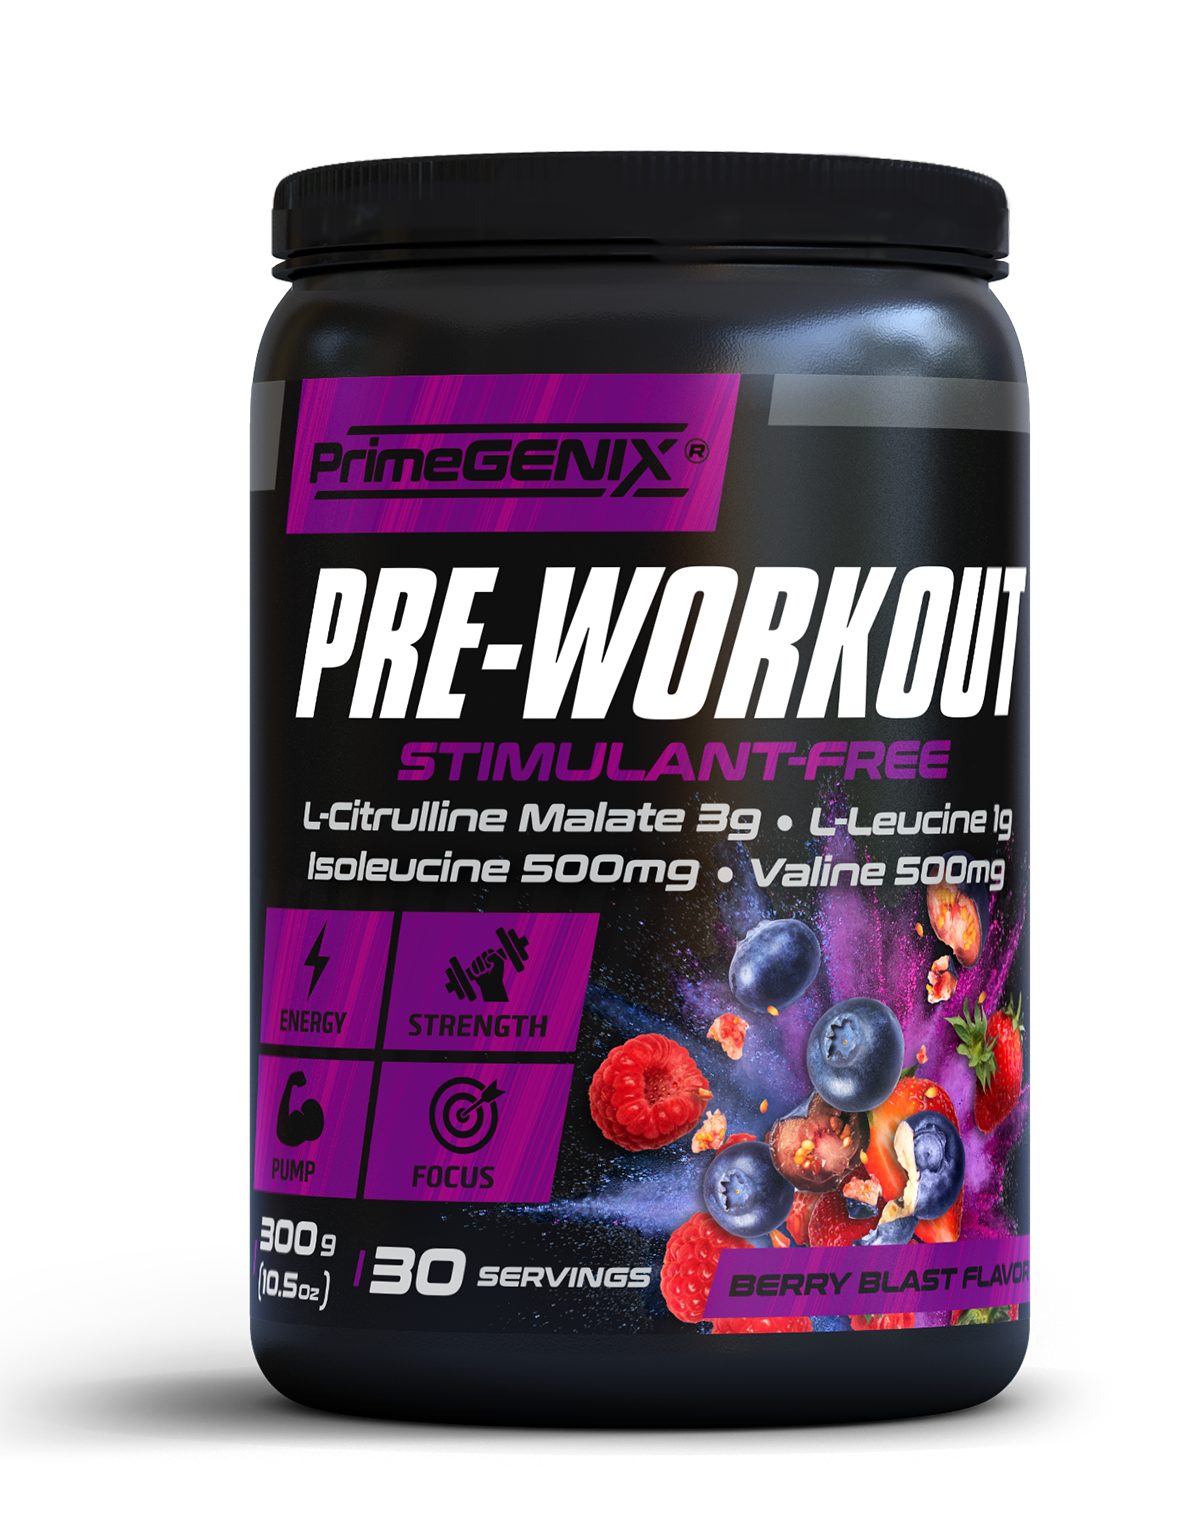 pre-workout-package